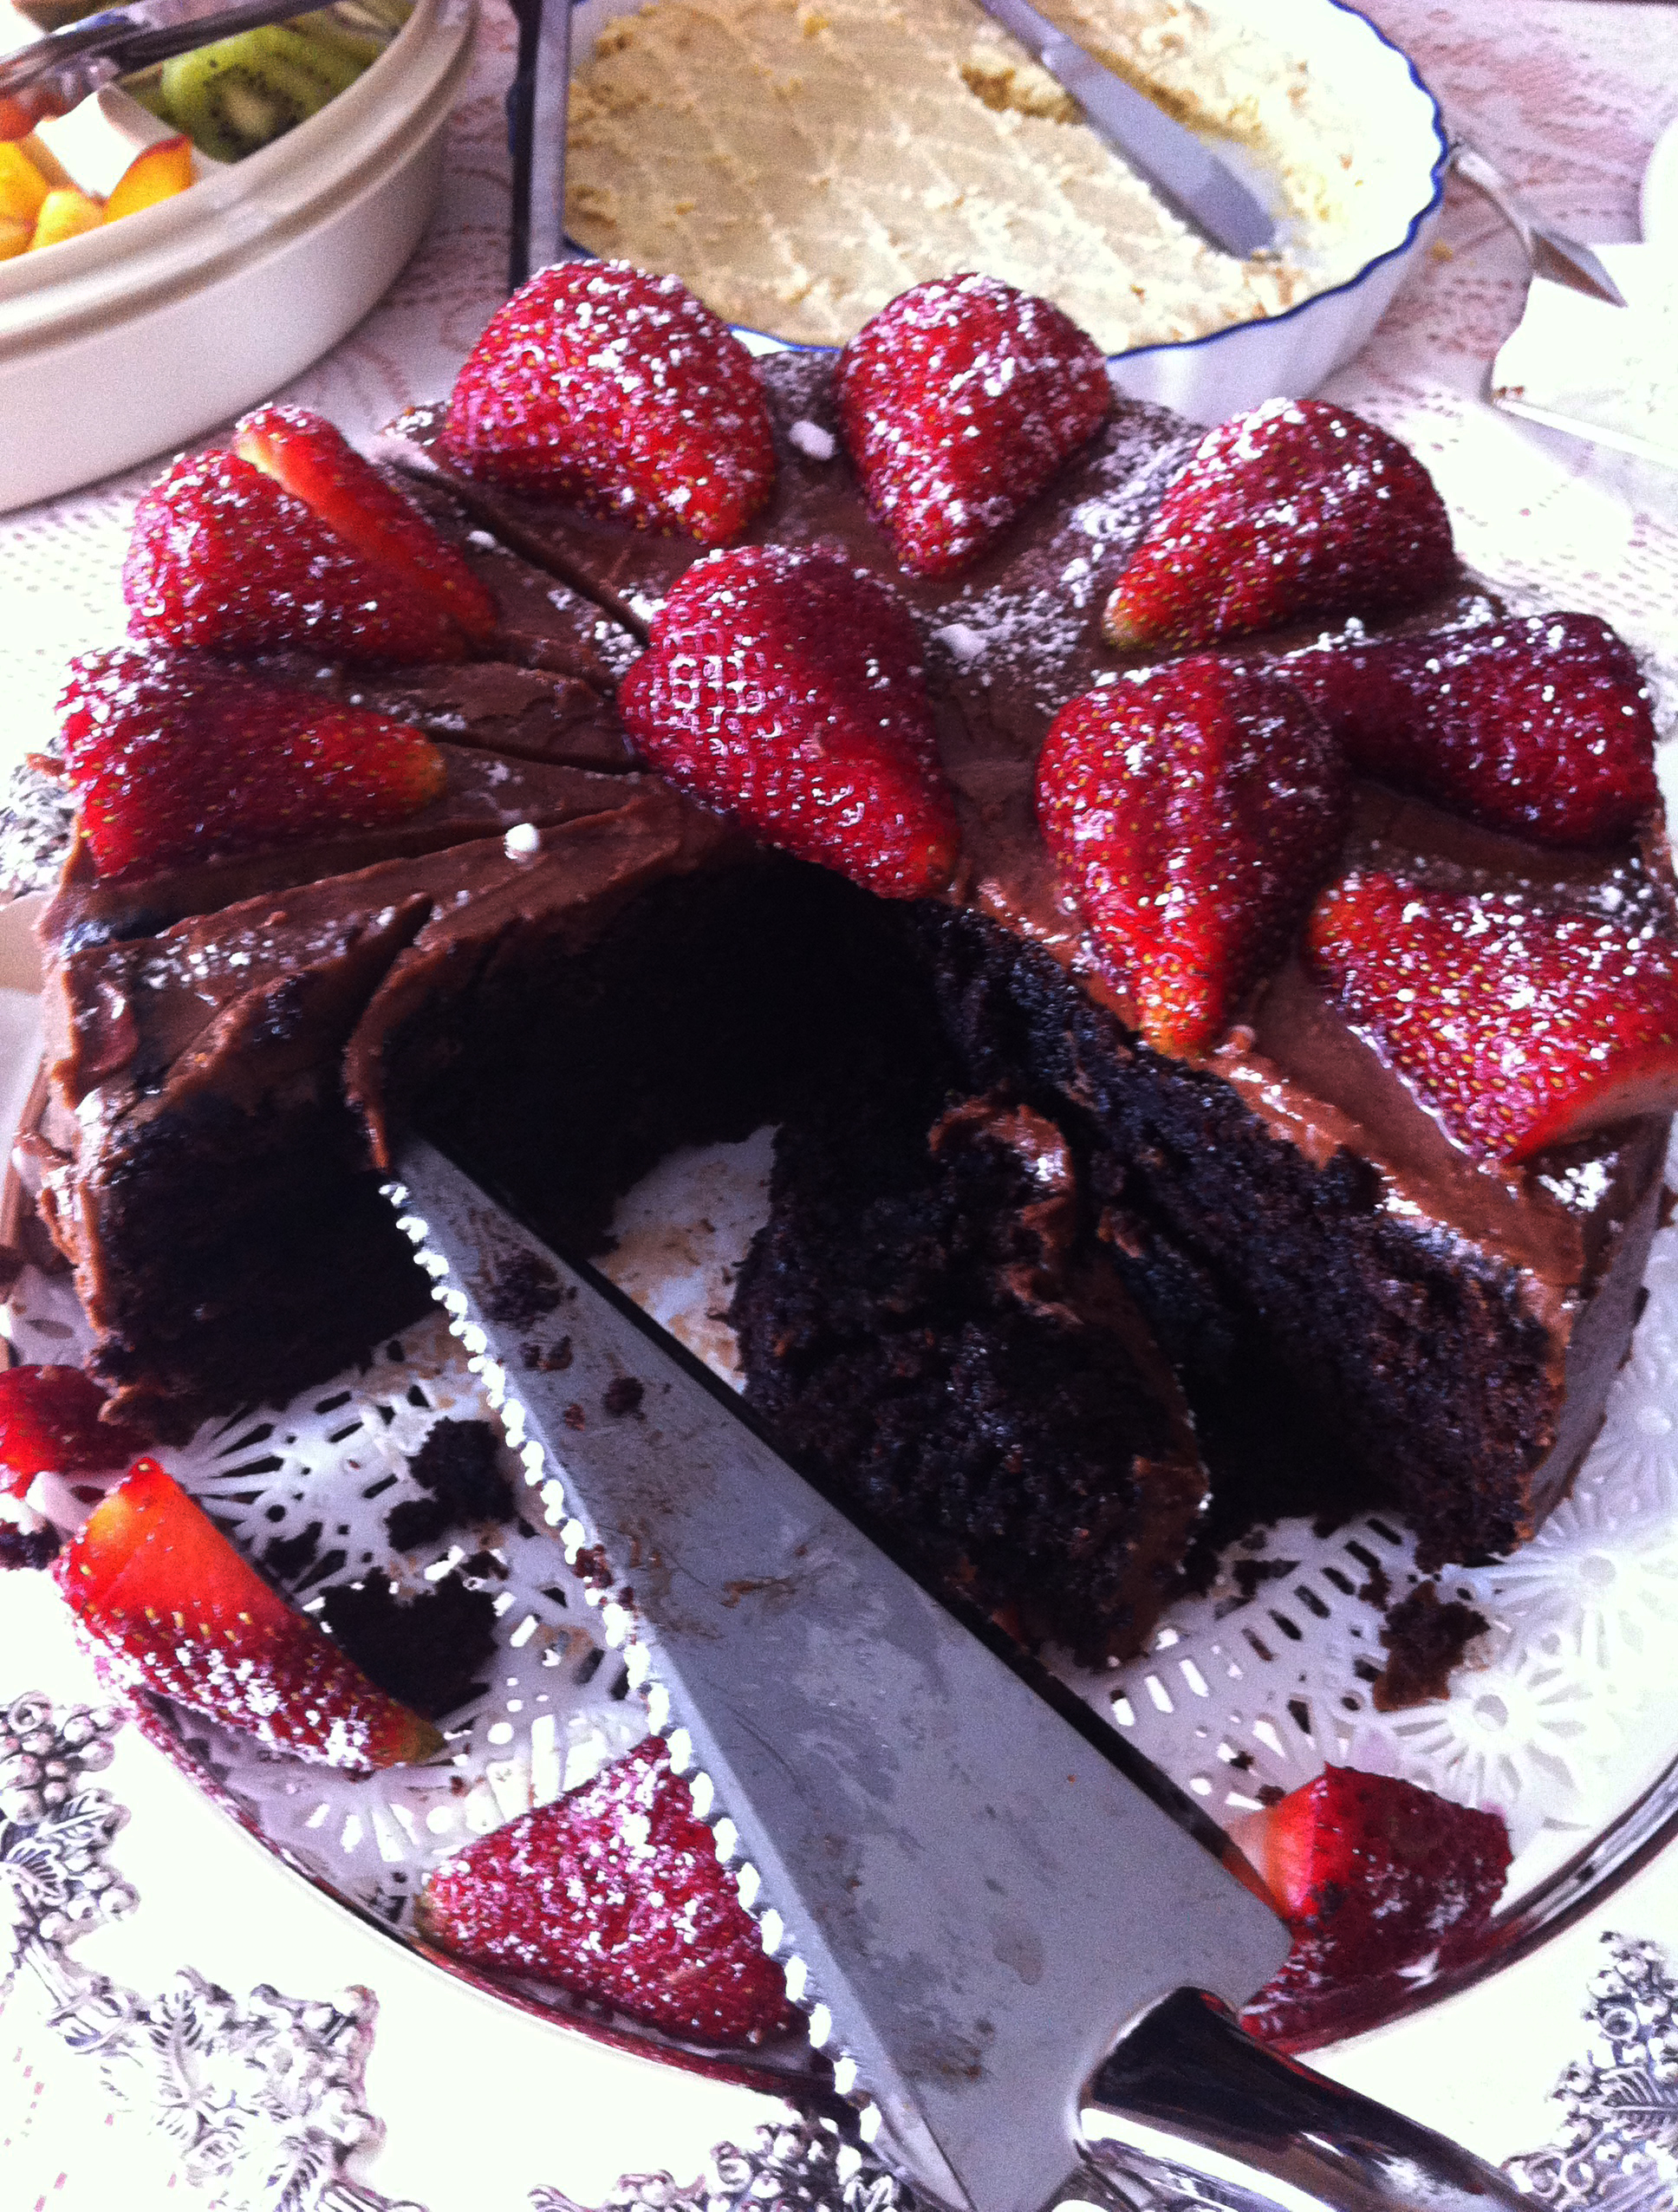 This Death by Chocolate cake with sumptuous strawberries on top didn't last long